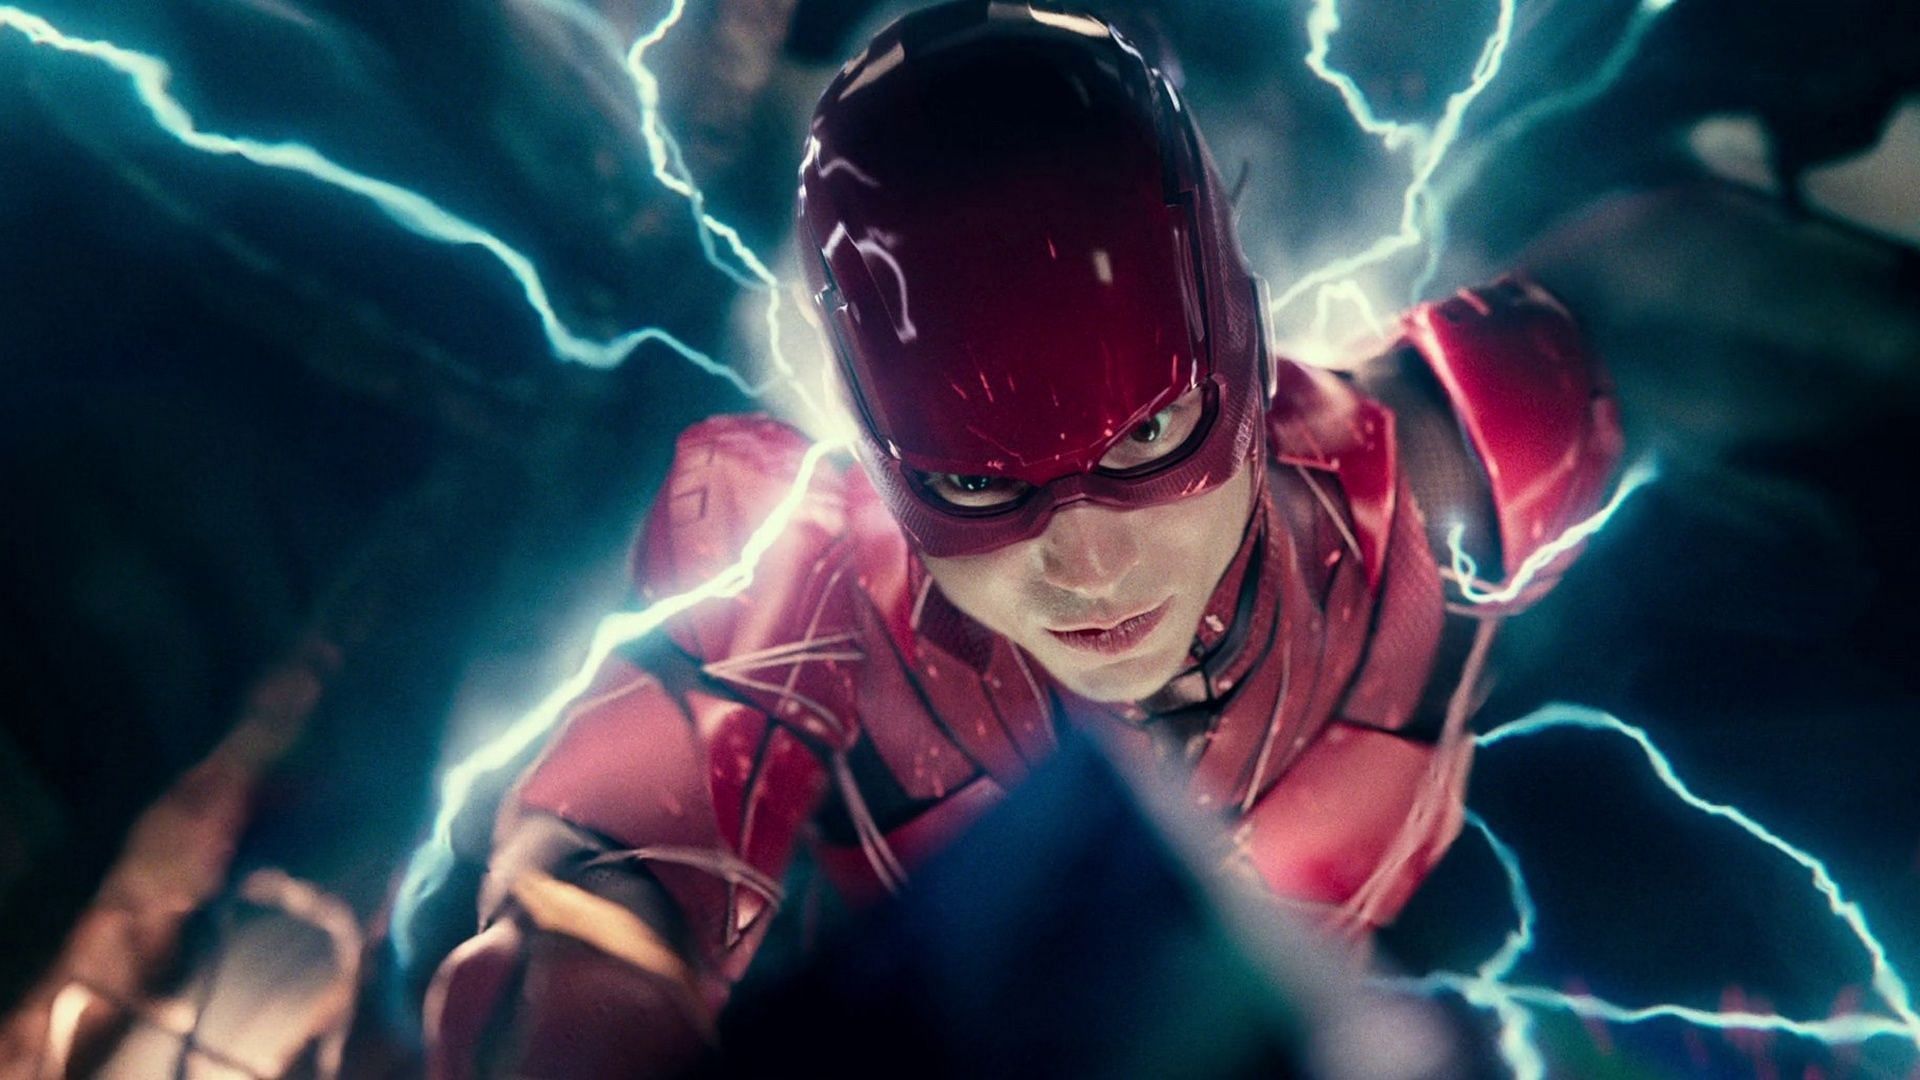 Final thoughts on The Flash (Image via DC Studios)